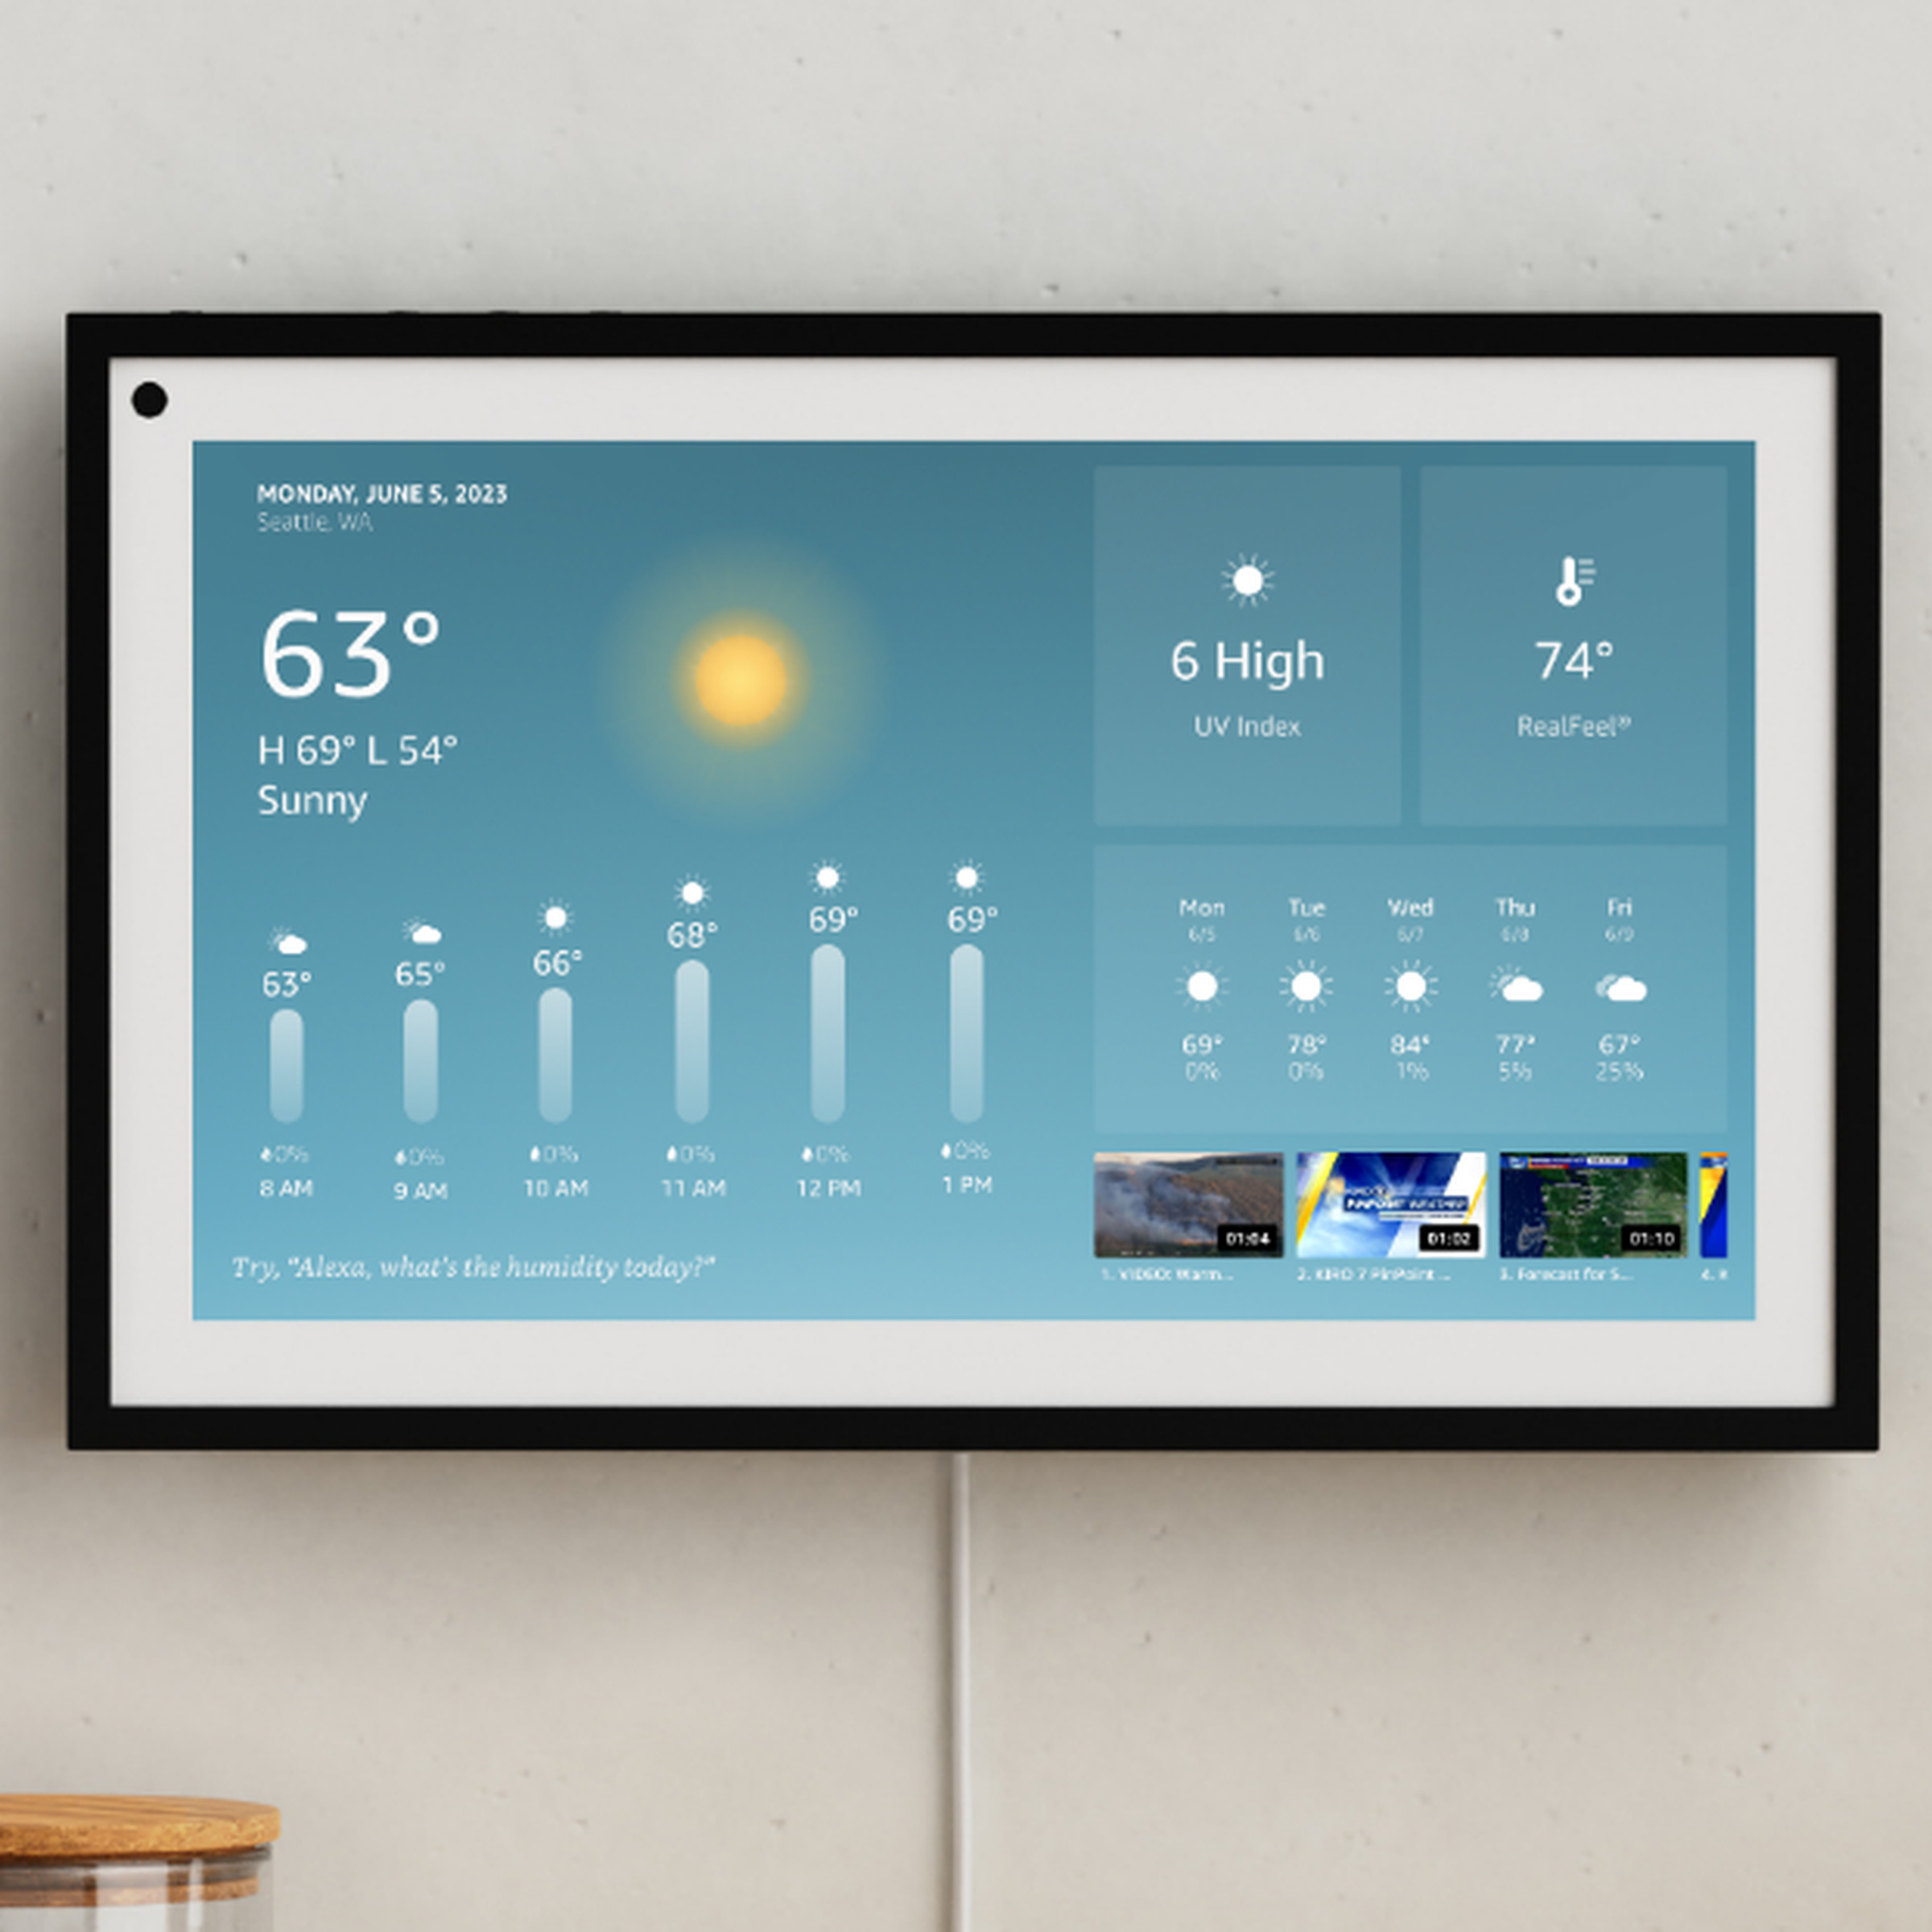 An Echo Show 15 mounted on a wall showing the local weather forecast.